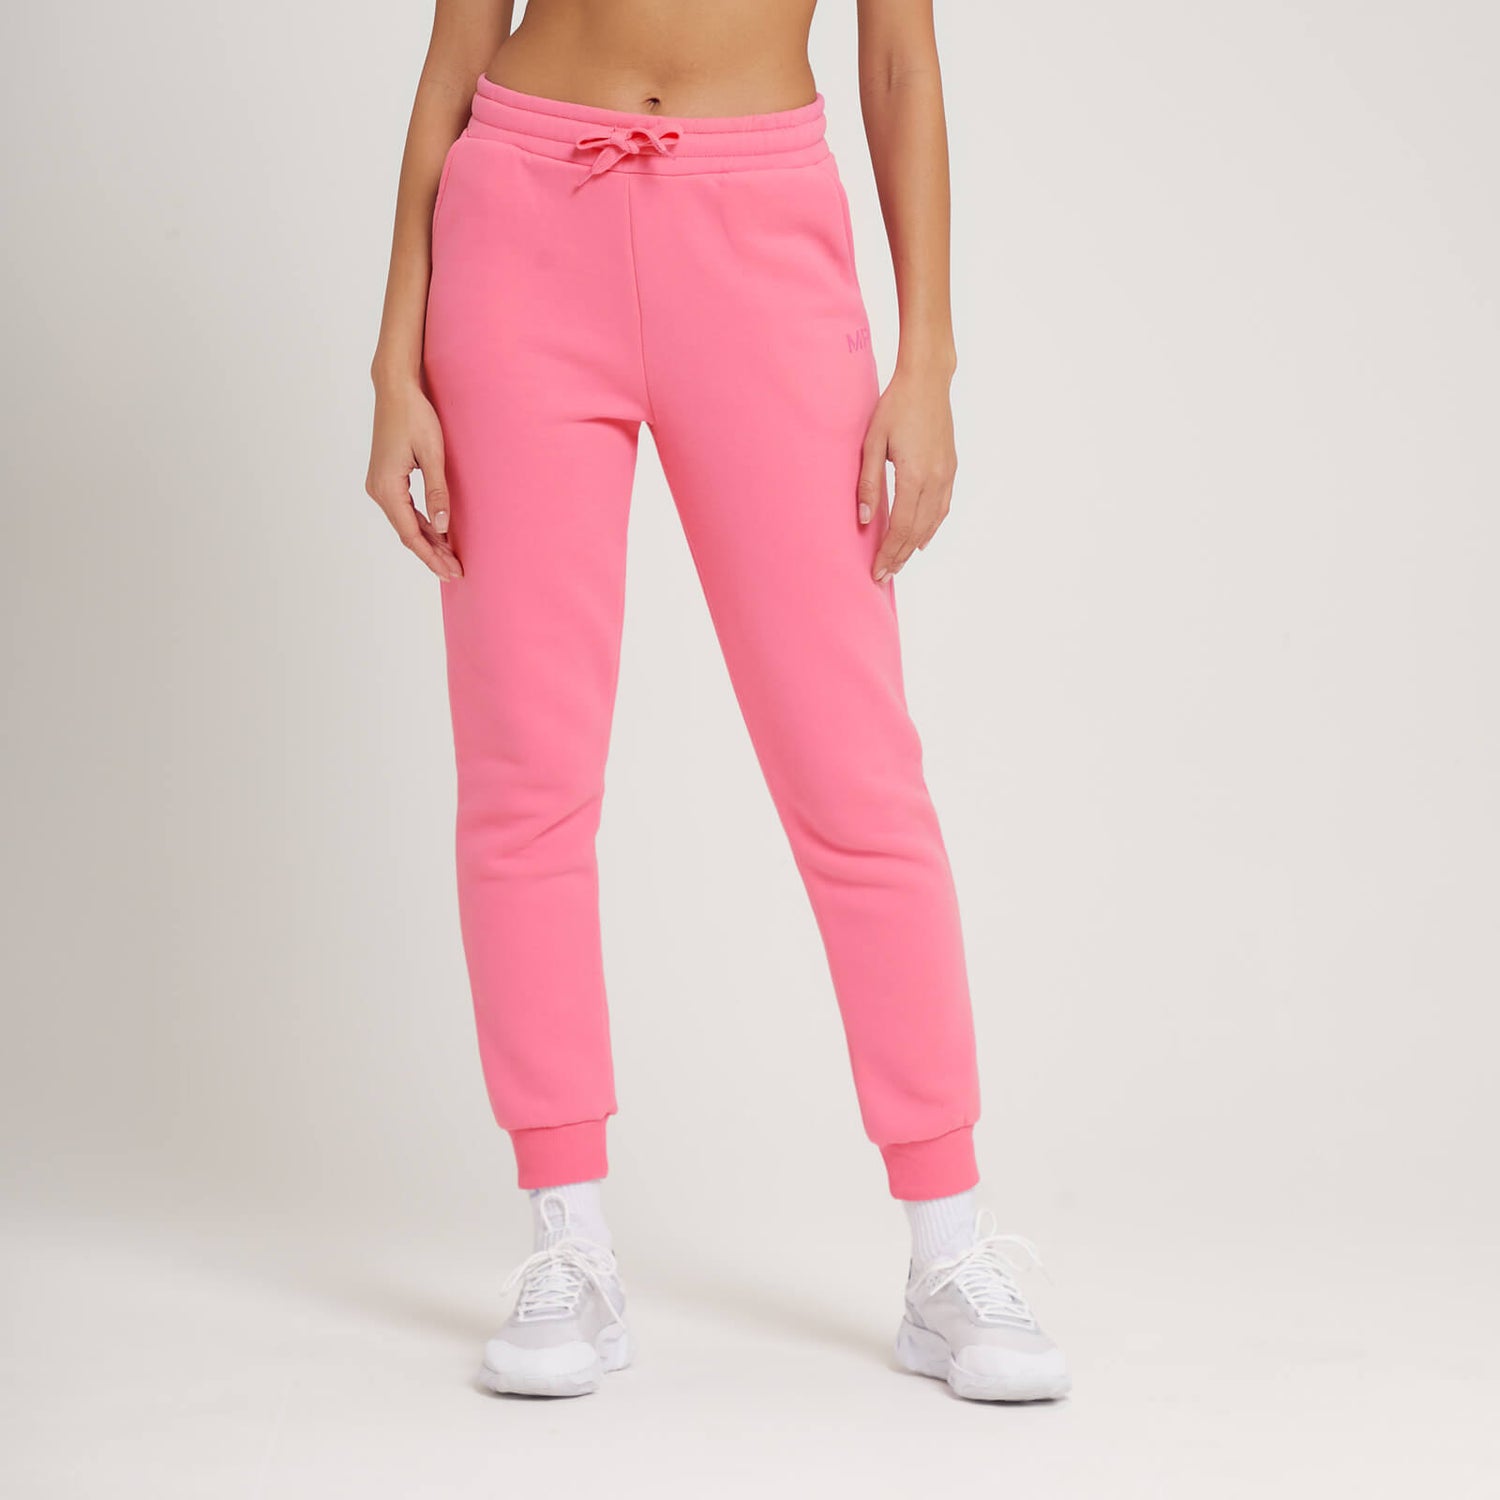 MP Women's Fade Graphic Jogger - Candy Floss - XS